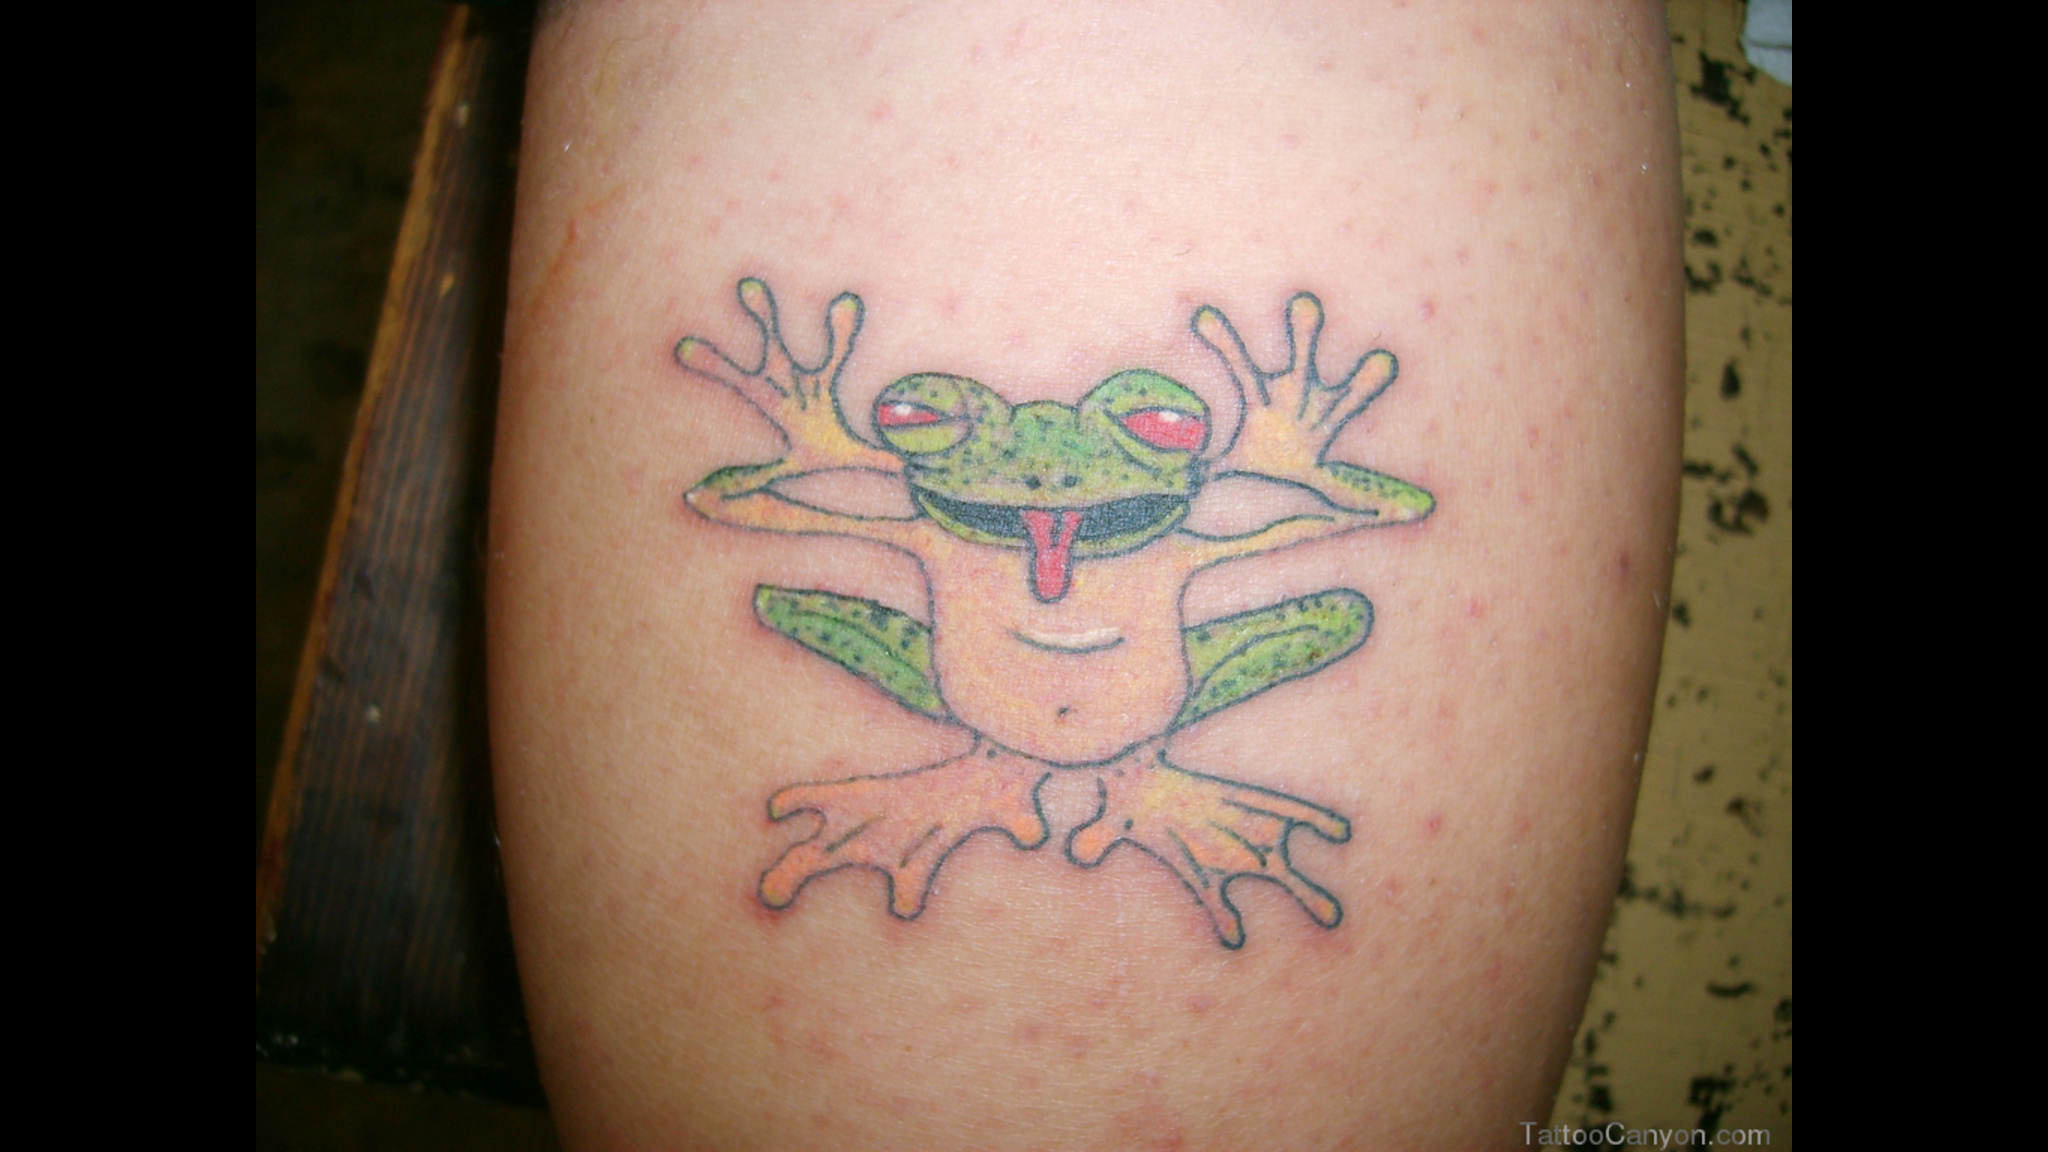 Funny Tattoos Ideas 22 Background